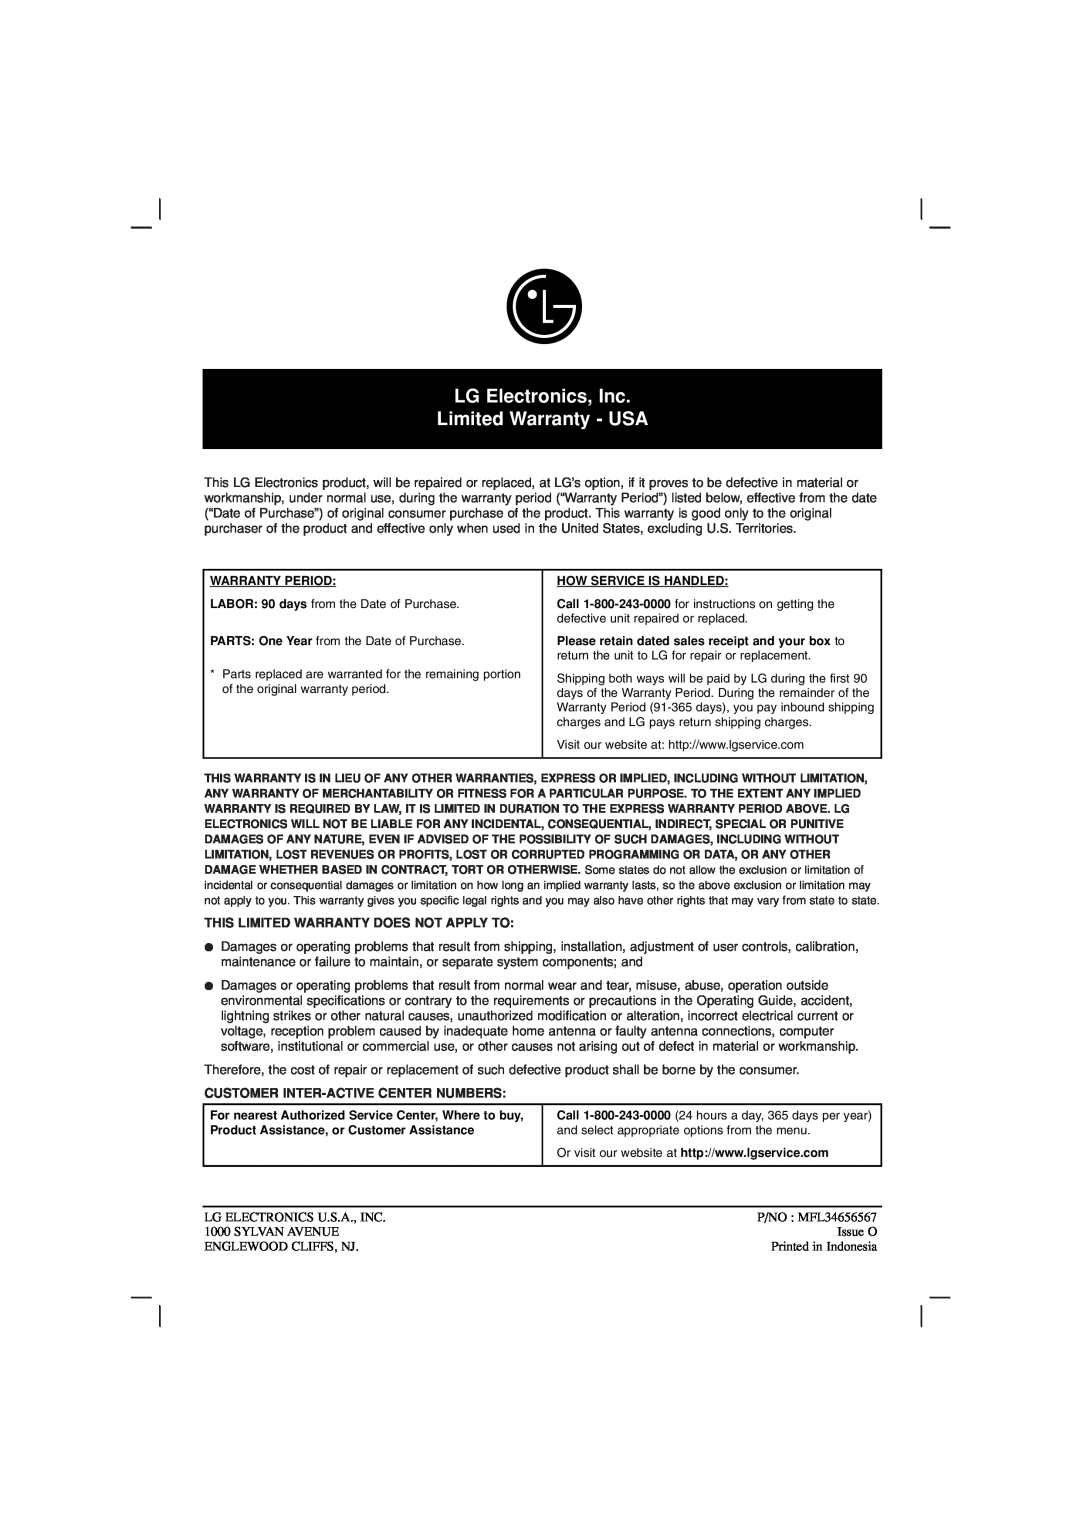 LG Electronics LHT764 owner manual This Limited Warranty Does Not Apply To, Customer Inter-Activecenter Numbers 